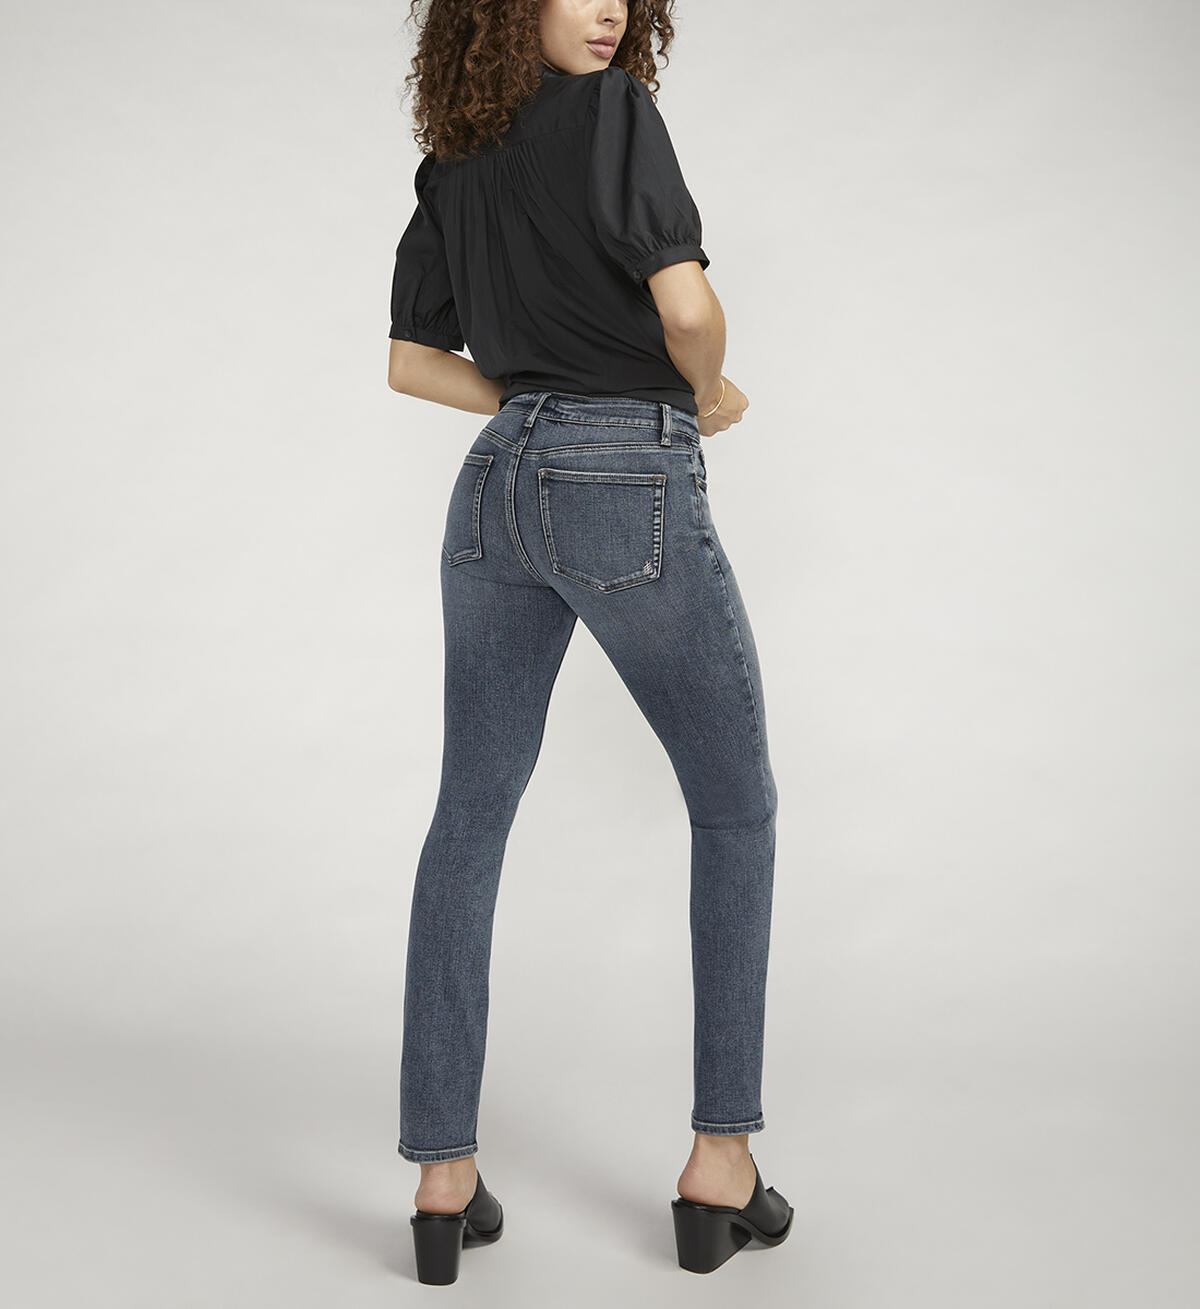 Most Wanted Mid Rise Straight Leg Jeans, Indigo, hi-res image number 1